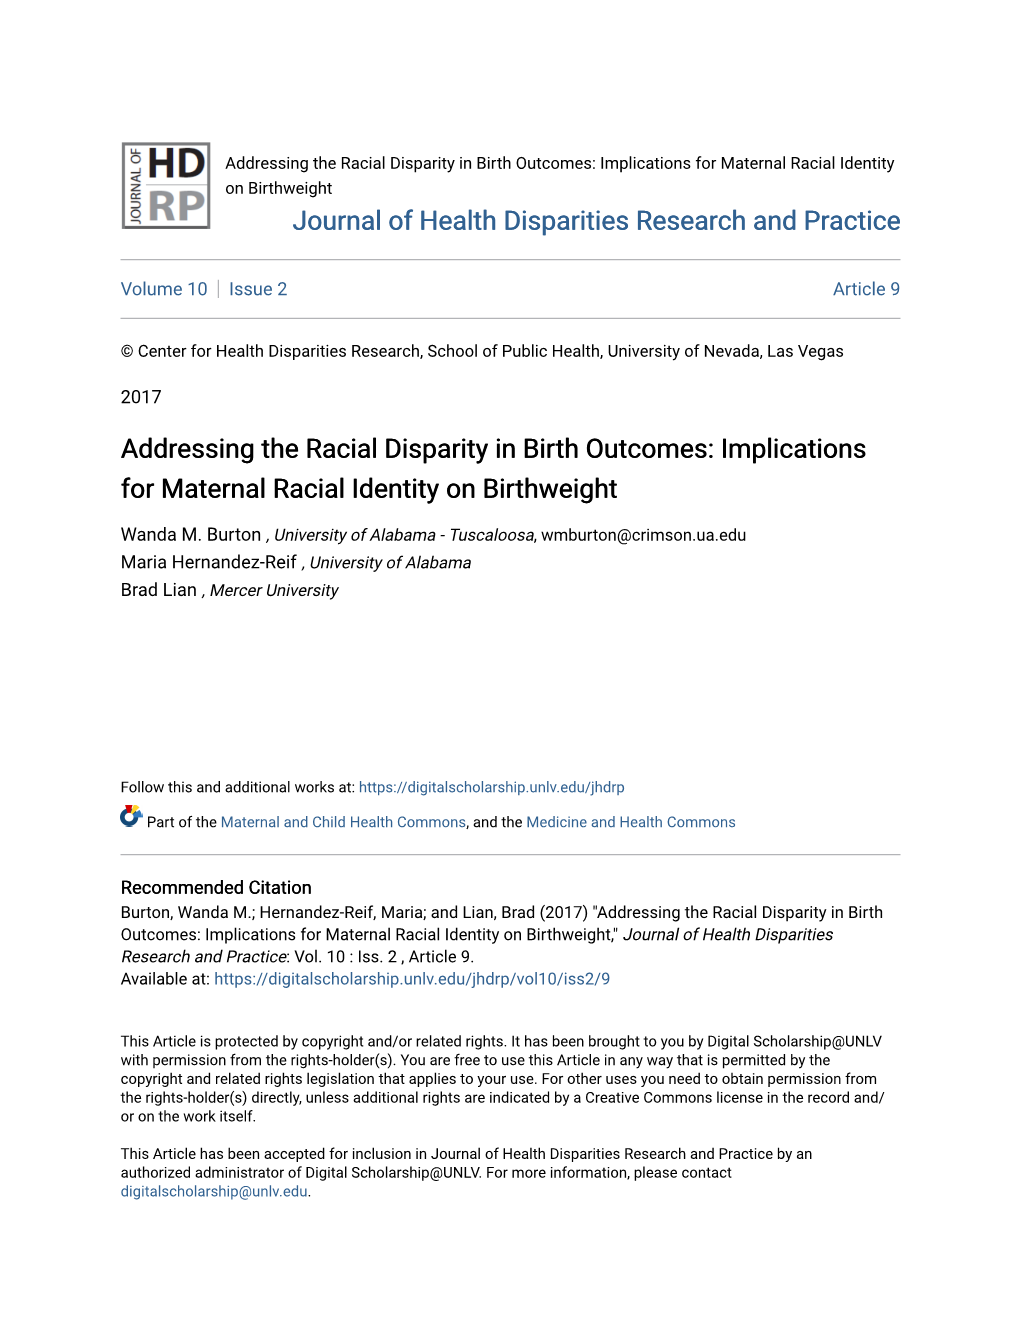 Addressing the Racial Disparity in Birth Outcomes: Implications for Maternal Racial Identity on Birthweight Journal of Health Disparities Research and Practice